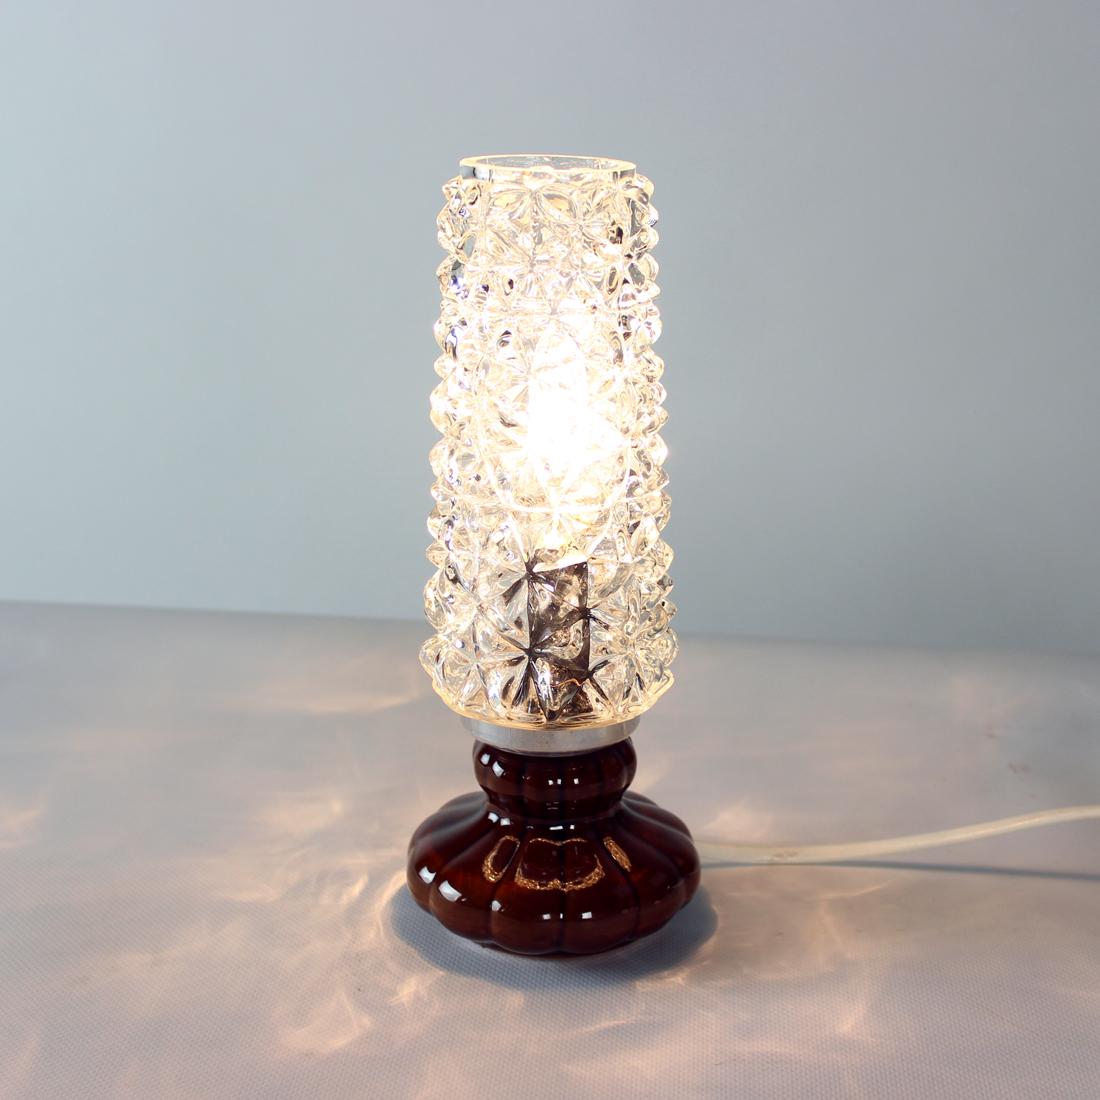 Midcentury Table Lamp In Ceramic & Glass, Czechoslovakia 1960s For Sale 1